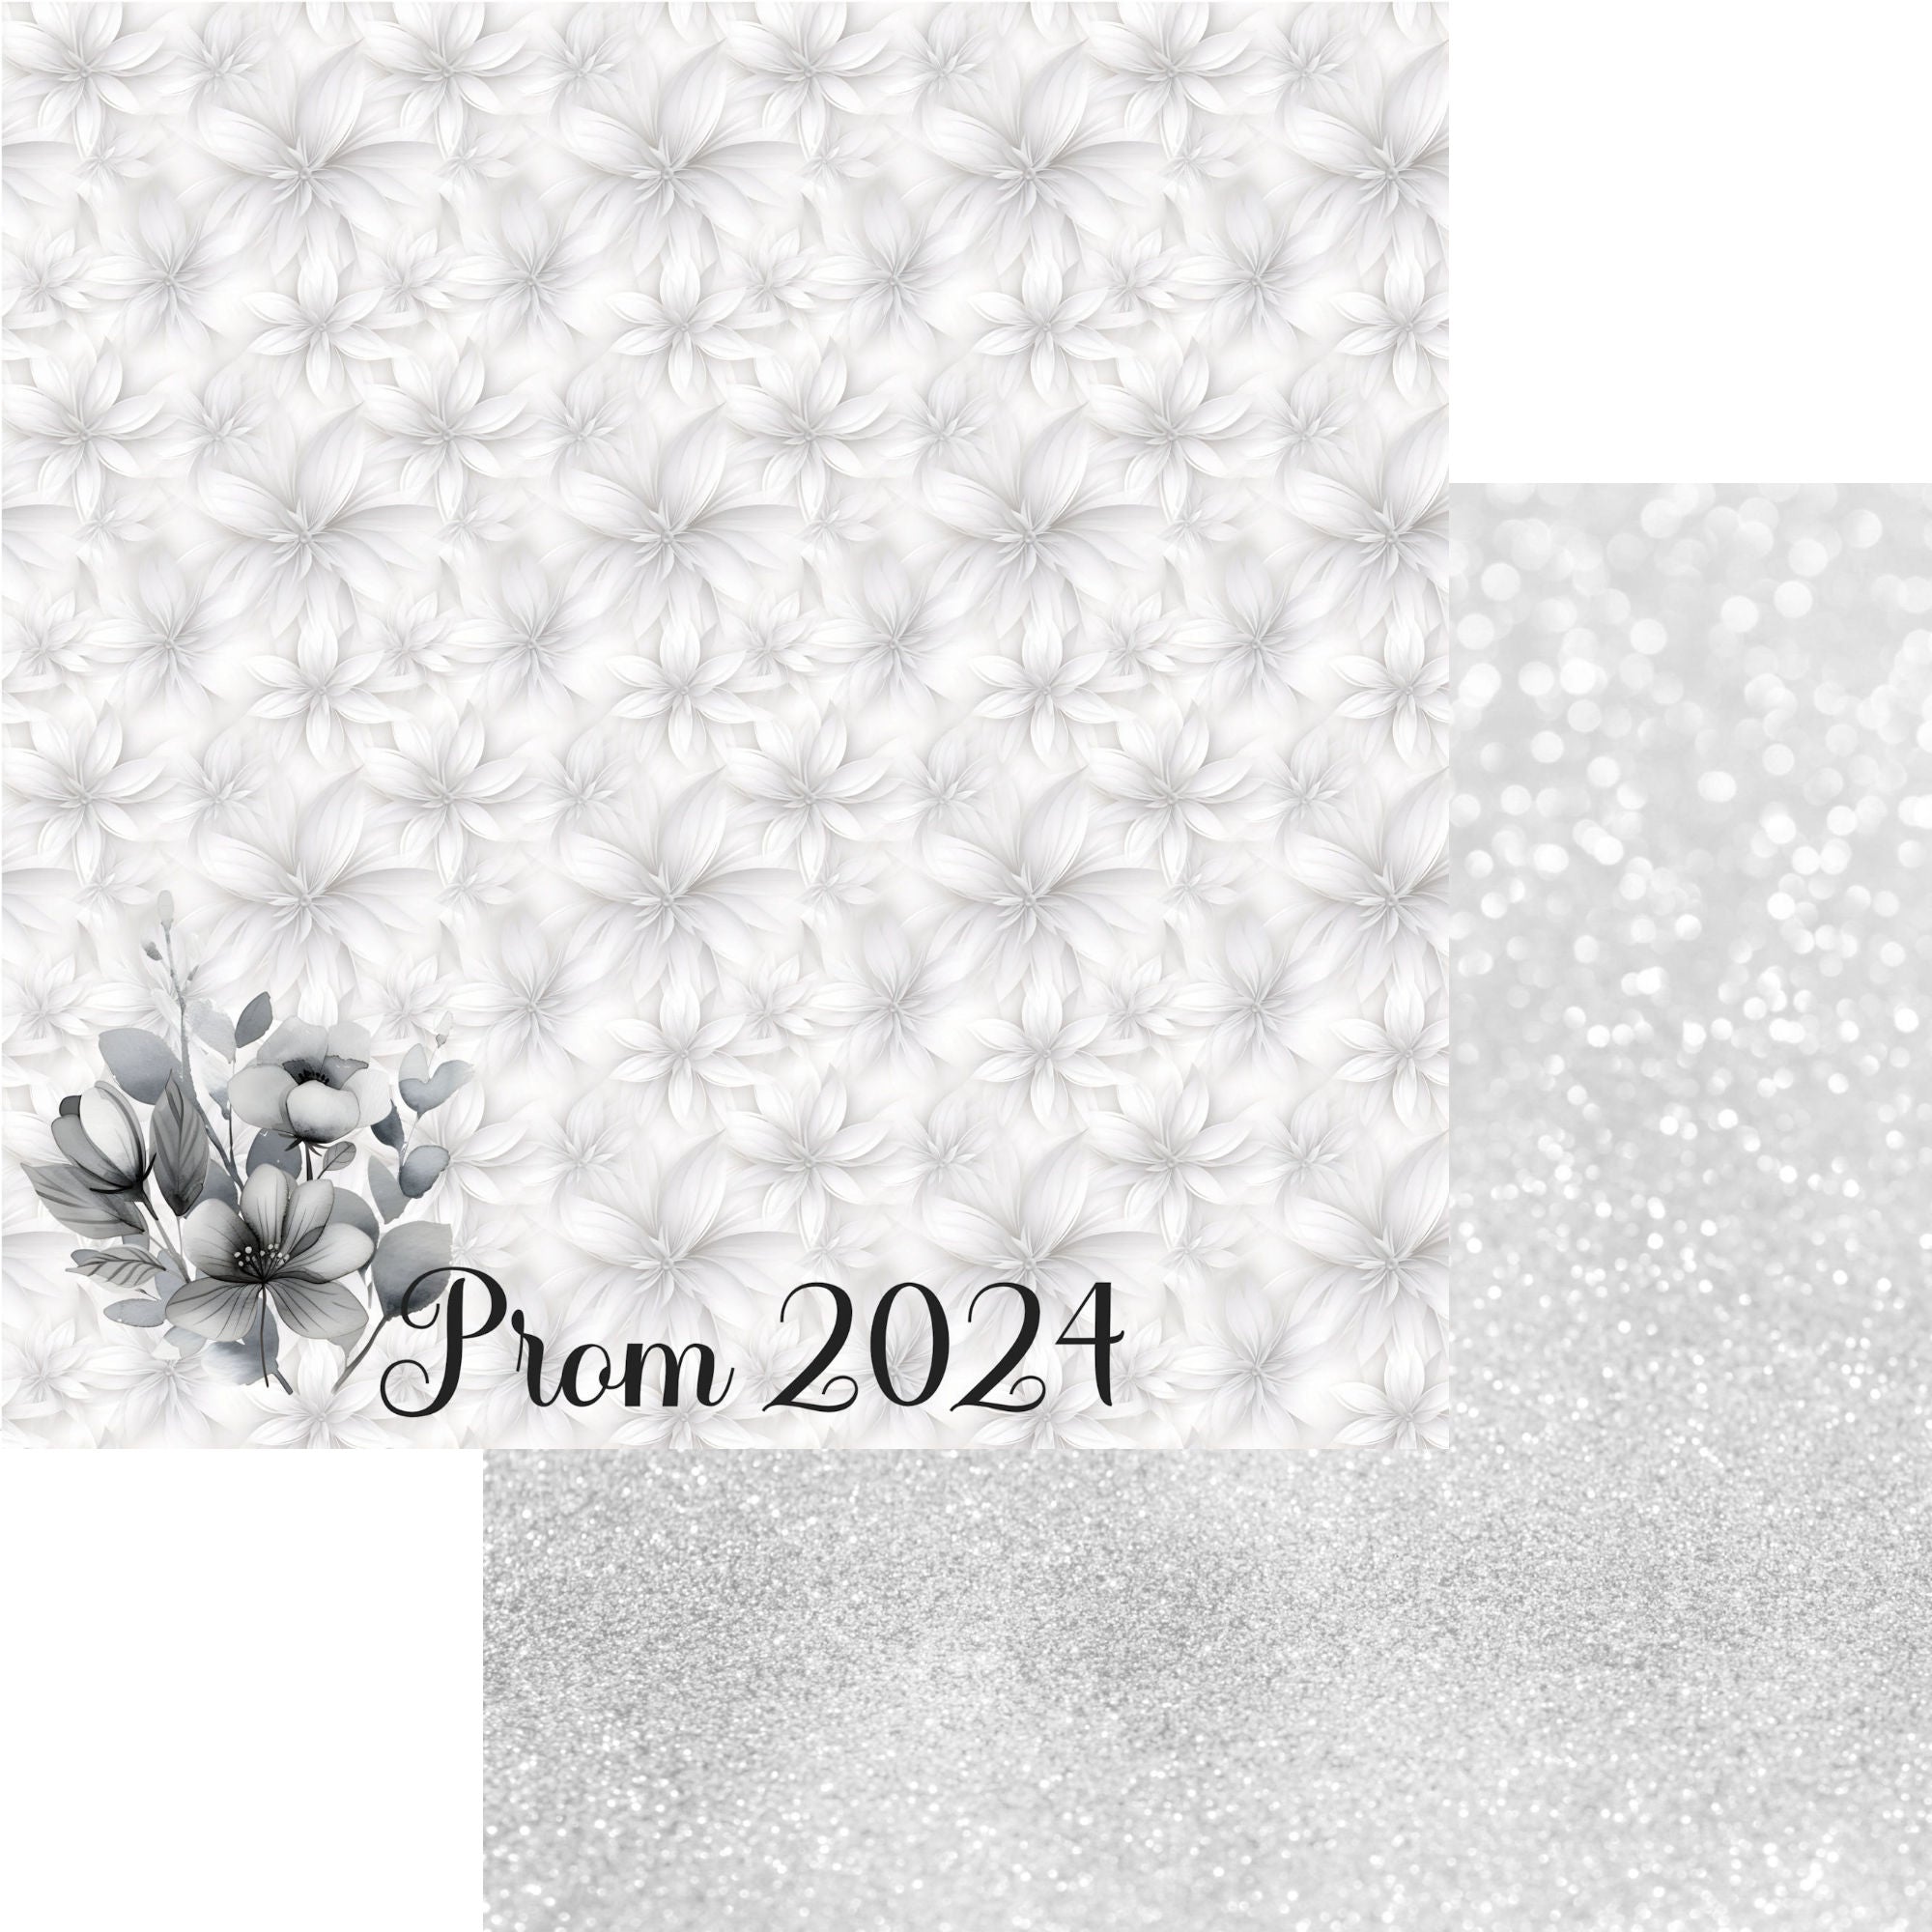 Prom Night Collection Prom 2024 12 x 12 Double-Sided Scrapbook Paper by SSC Designs